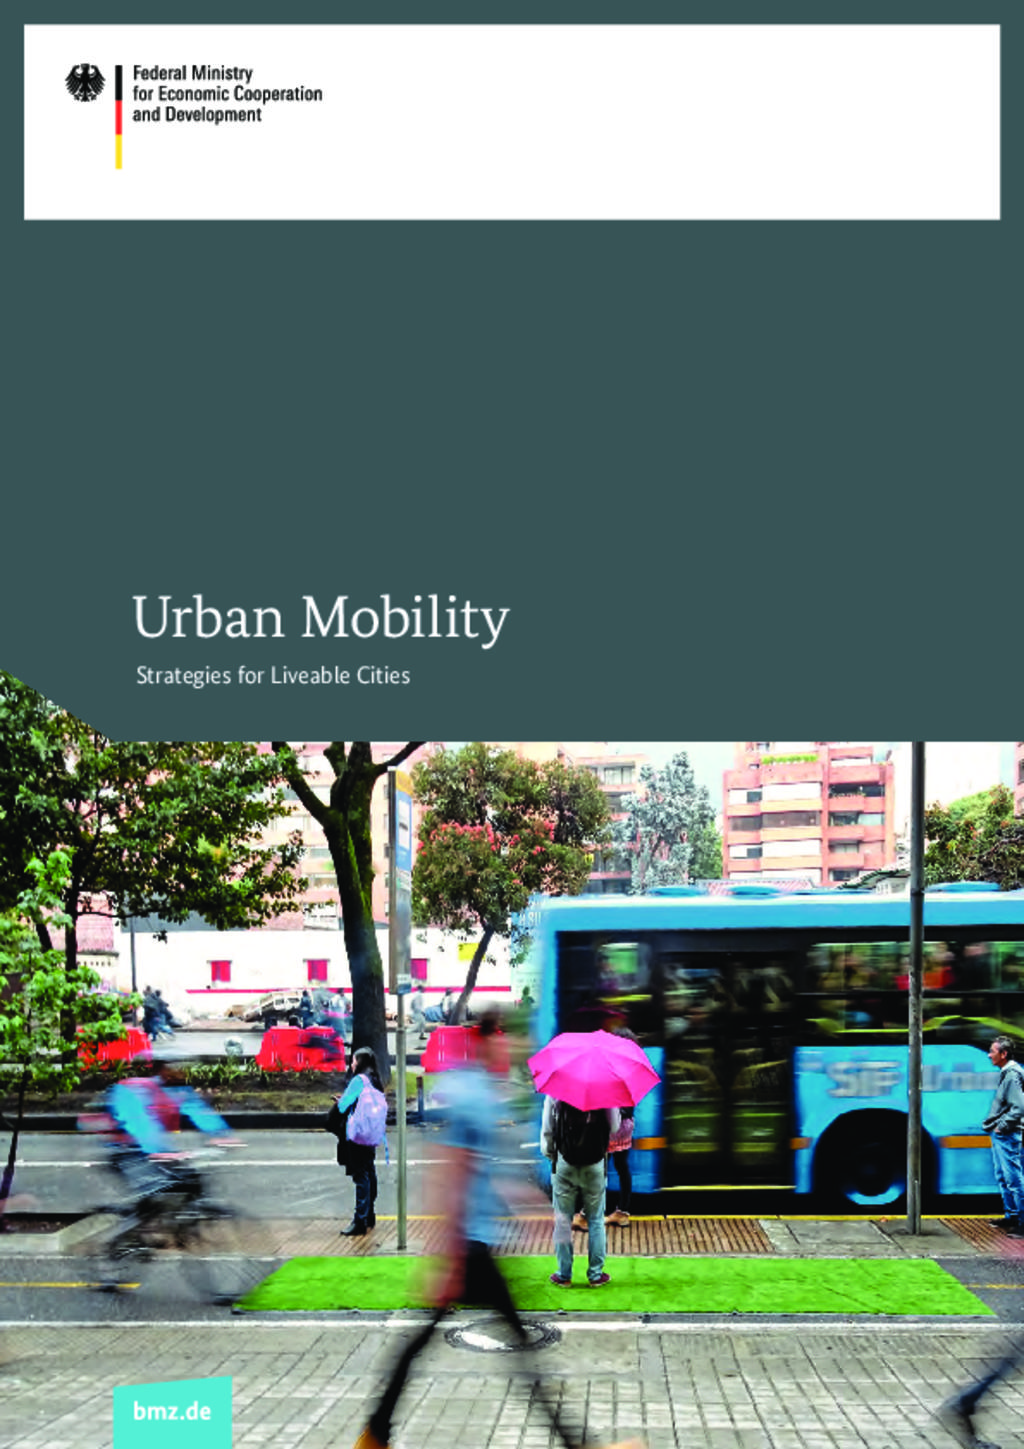 Urban Mobility: Strategies for Liveable Cities